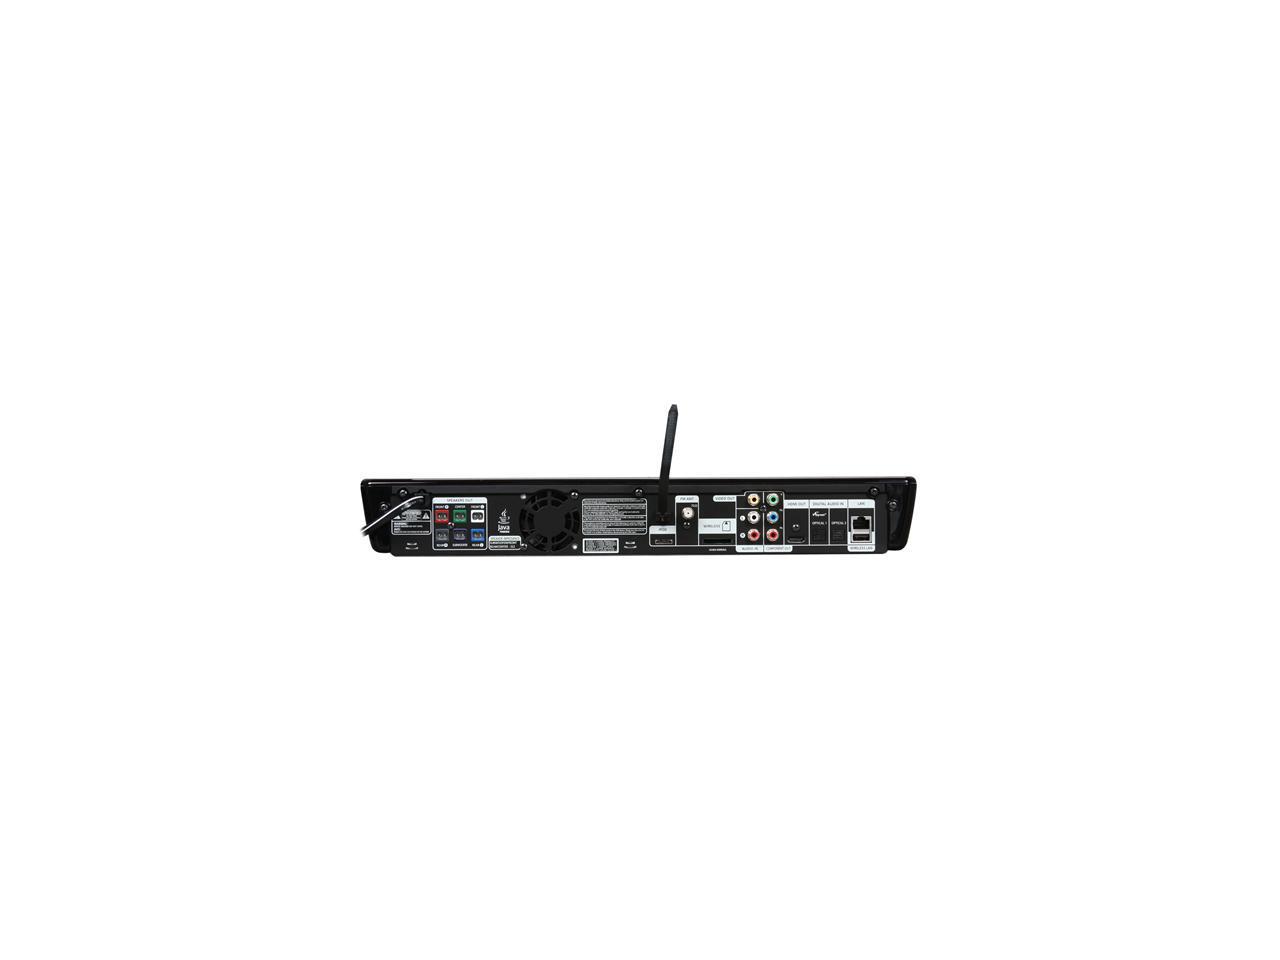 Samsung HT-BD1250 Blu-Ray 5.1-Channel Home Theater System - Newegg.com